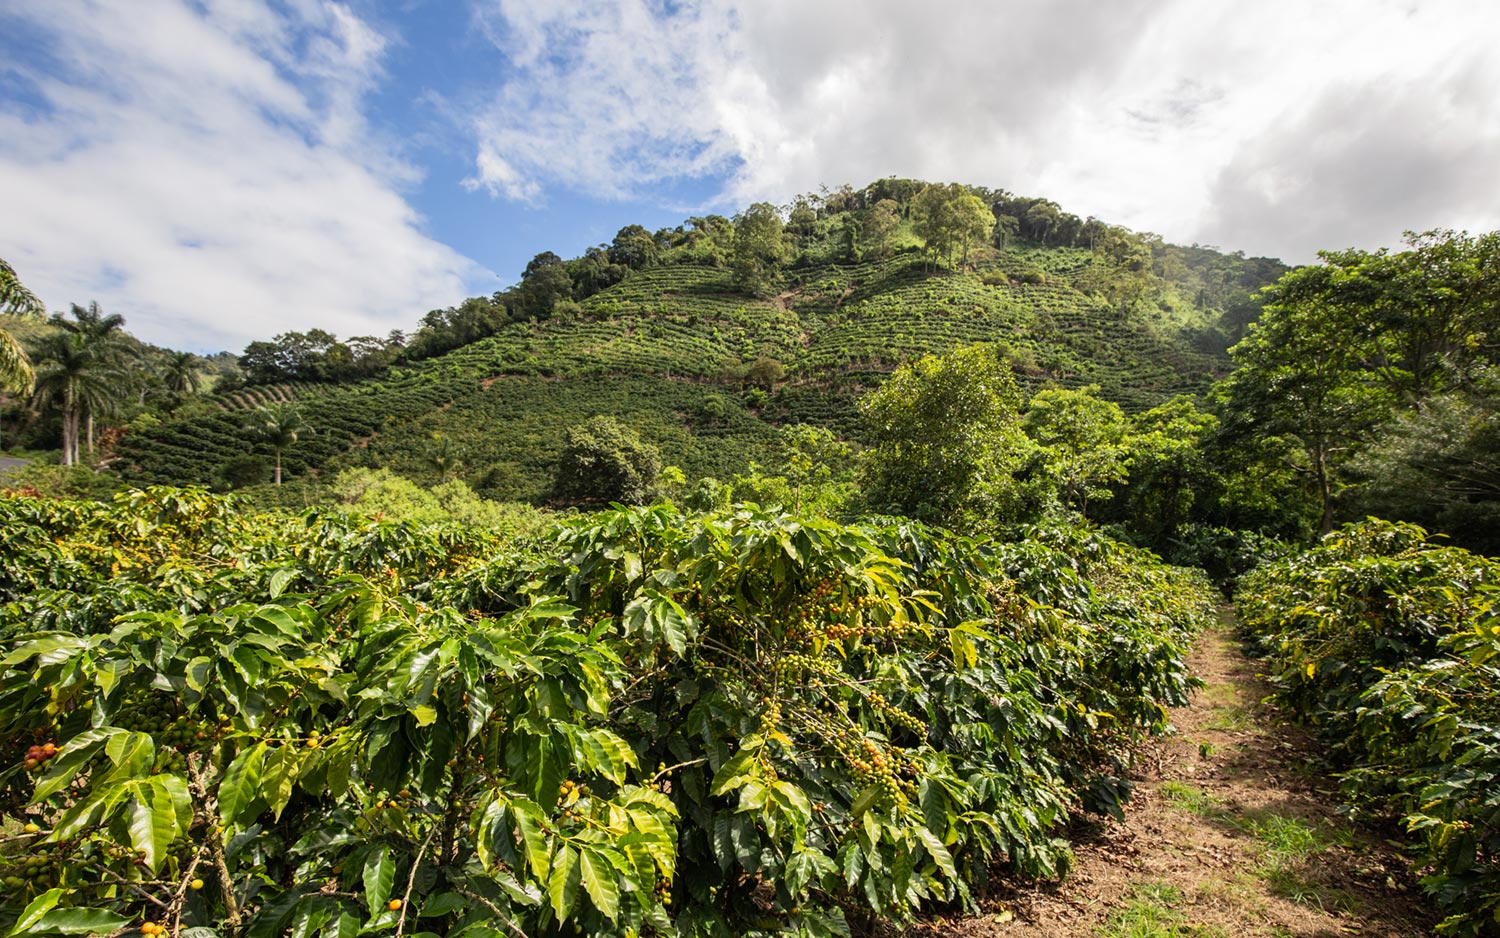 Coffee plantation in Costa Rica under clear blue skies, showcasing the beauty of the landscape and agriculture.